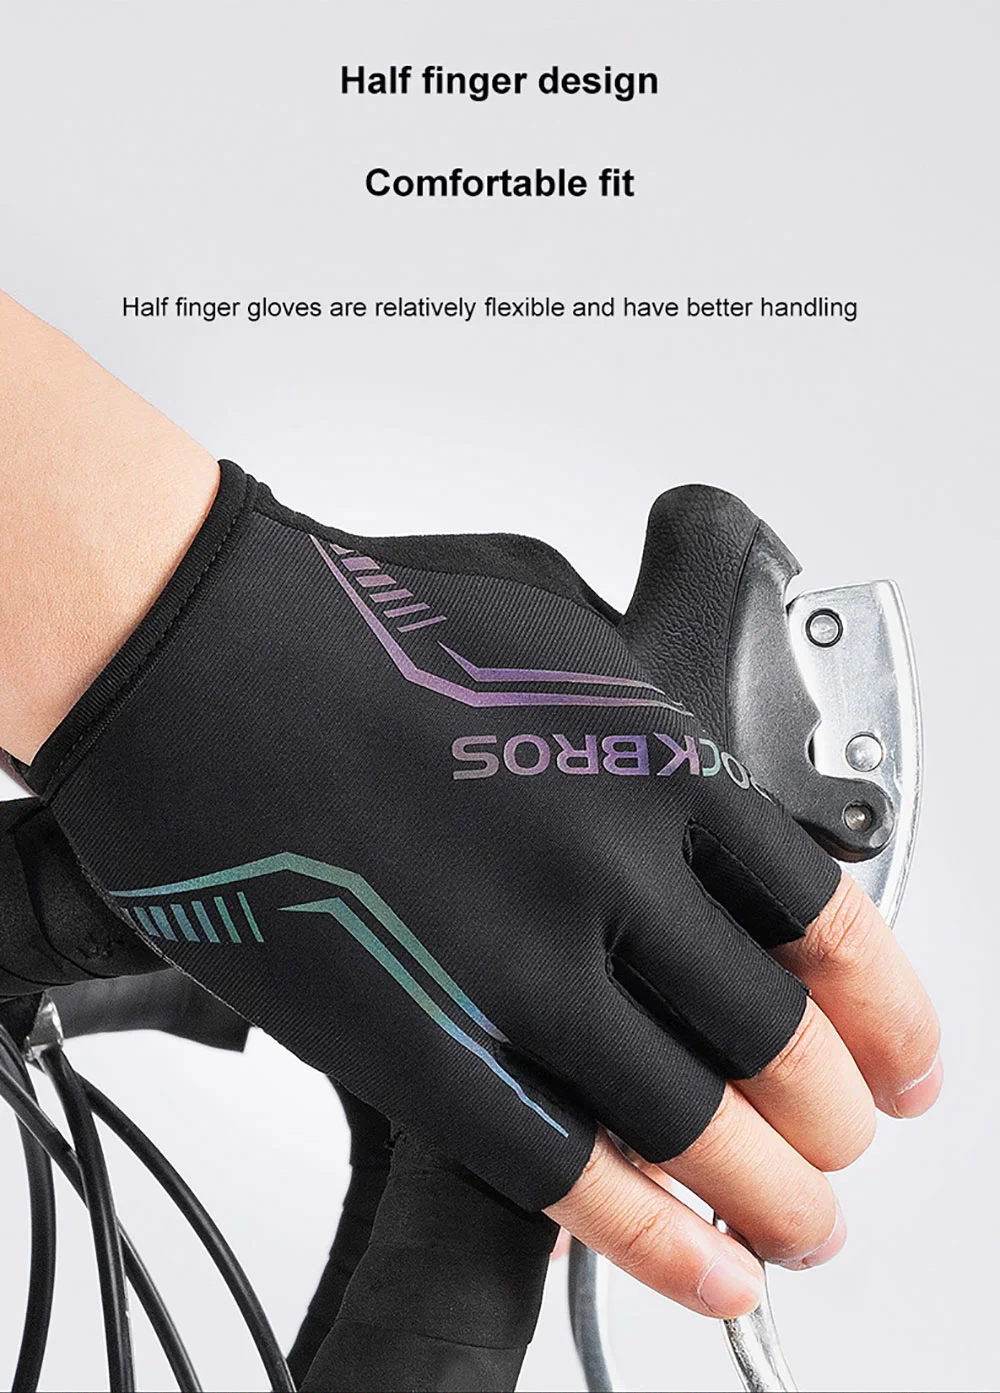 Made in China Rockbros Colorful Reflective Half Finger Gloves Cycling Riding Gloves